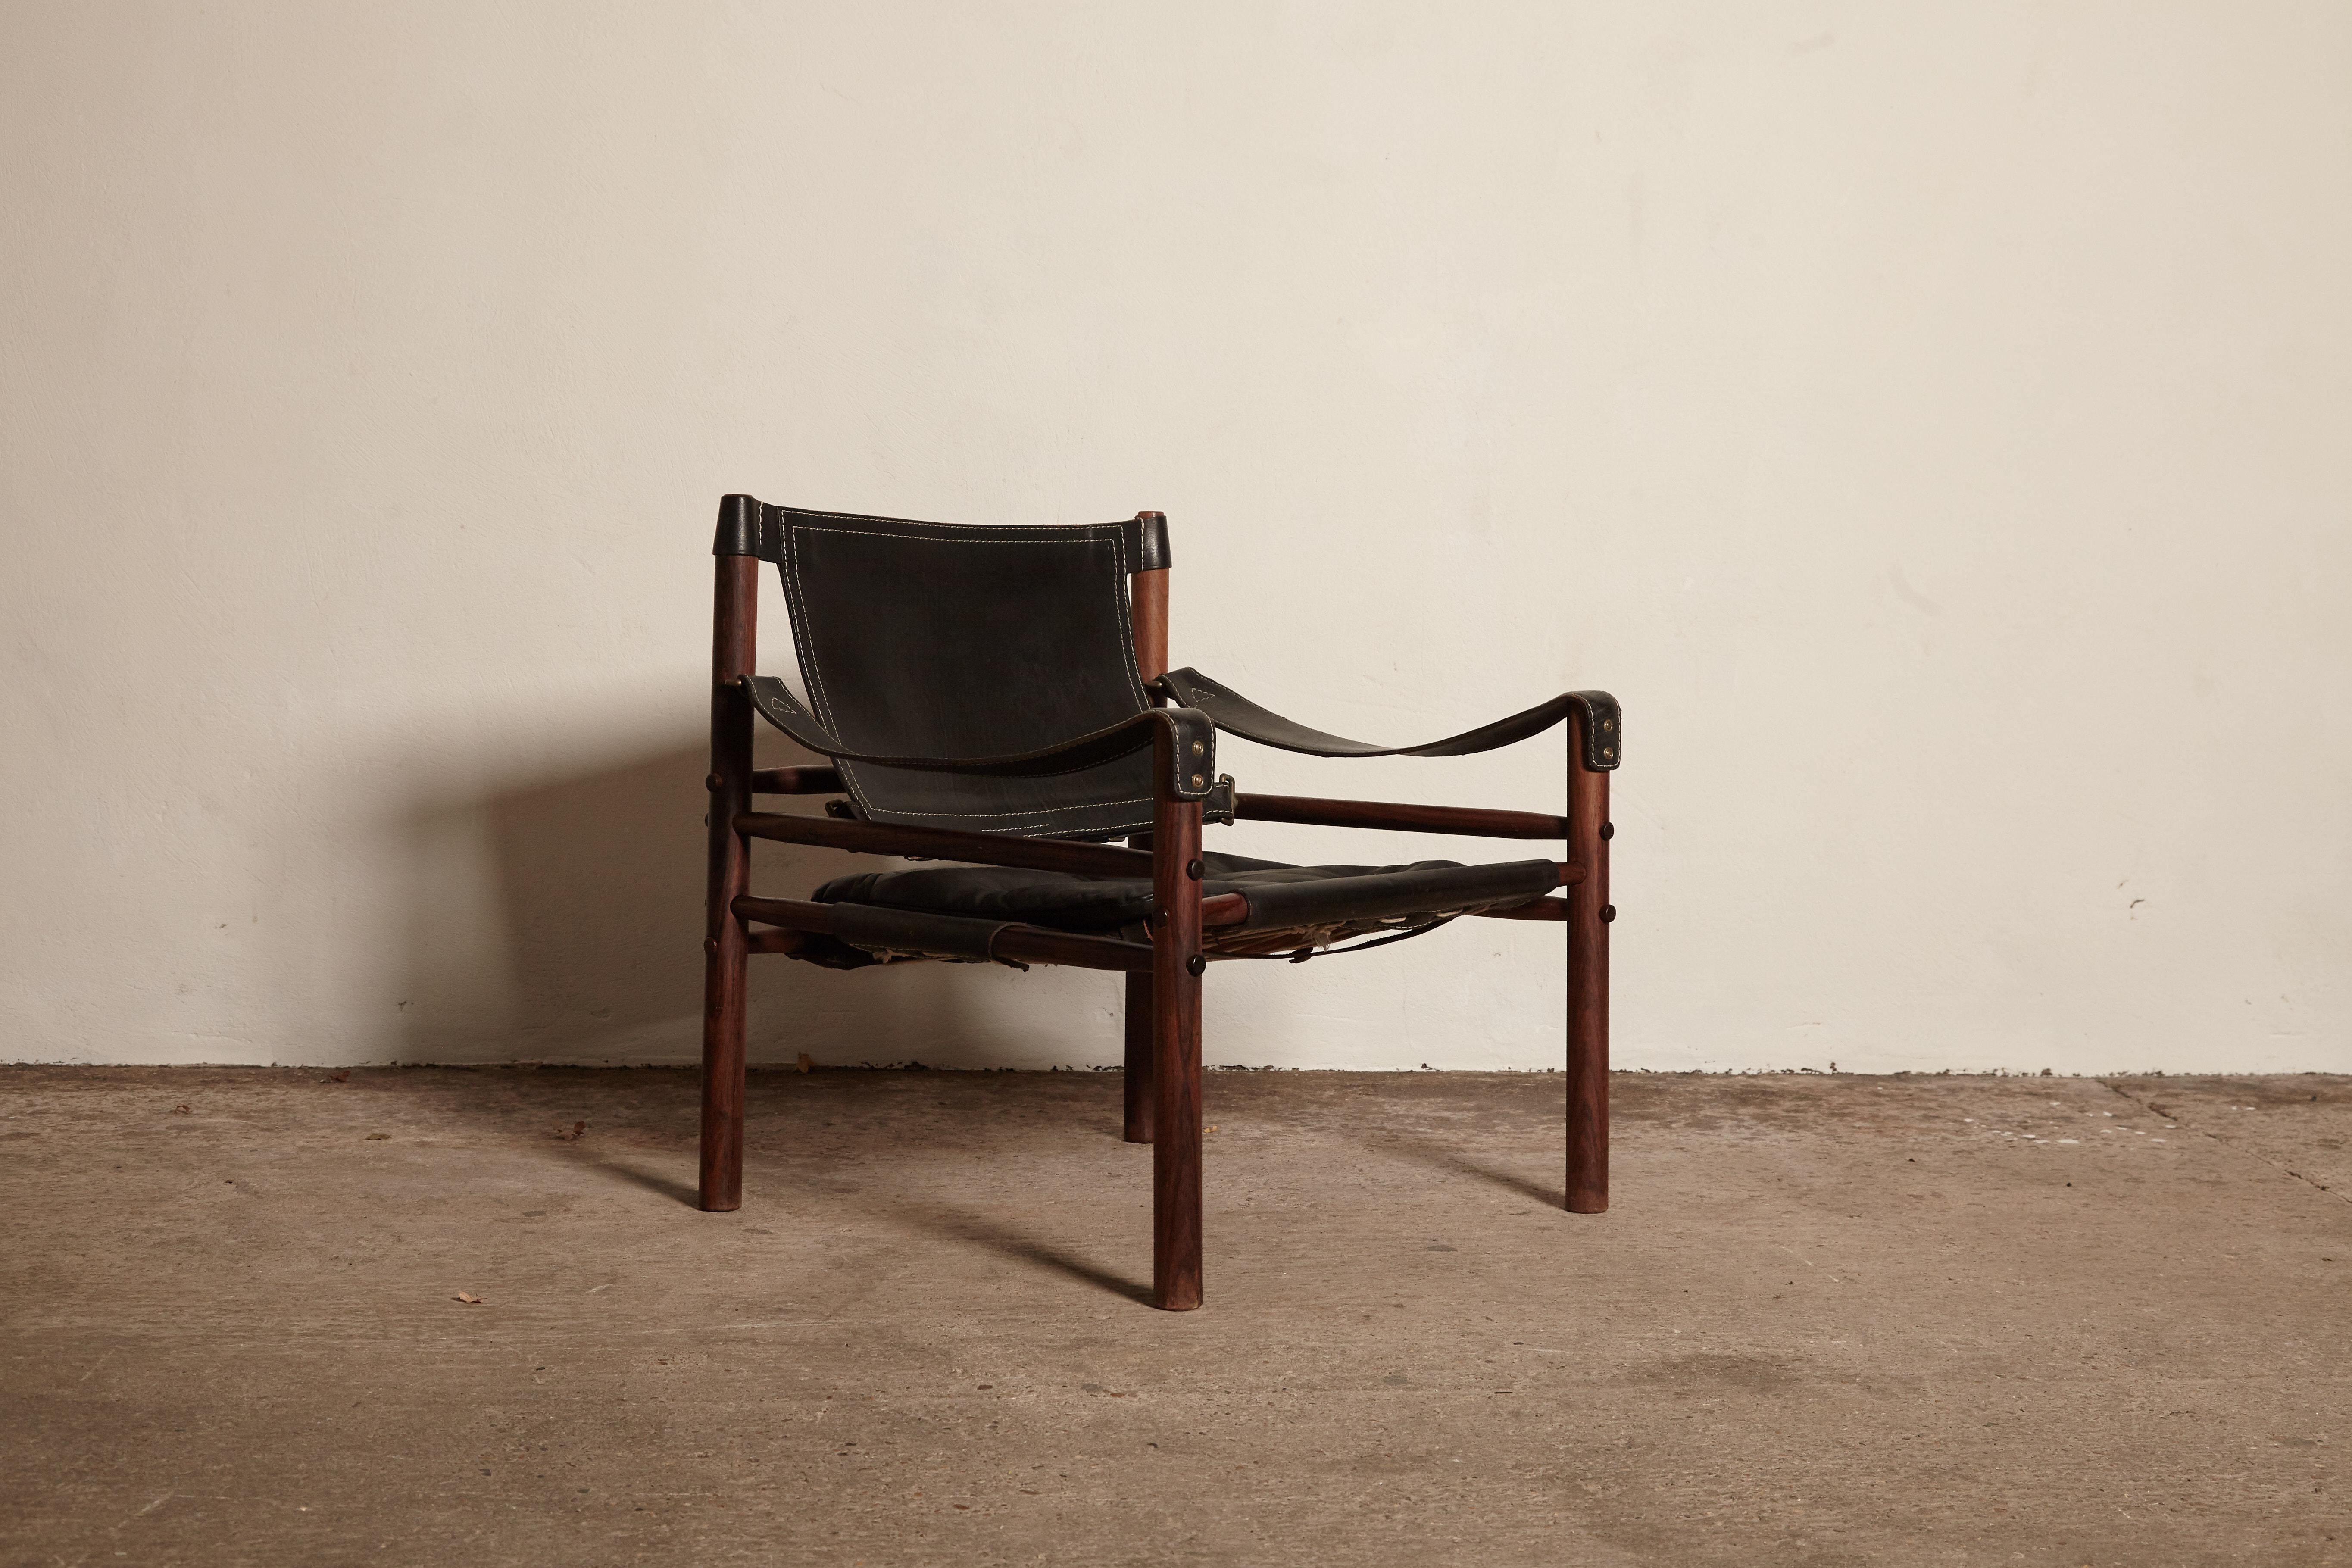 Original Arne Norell Safari (Sirocco) chair with wood frame and black leather in lovely vintage condition. The chair will be disassembled for shipping but was designed to be taken apart and put together again easily.

Measures: Width 66 cm.
Depth